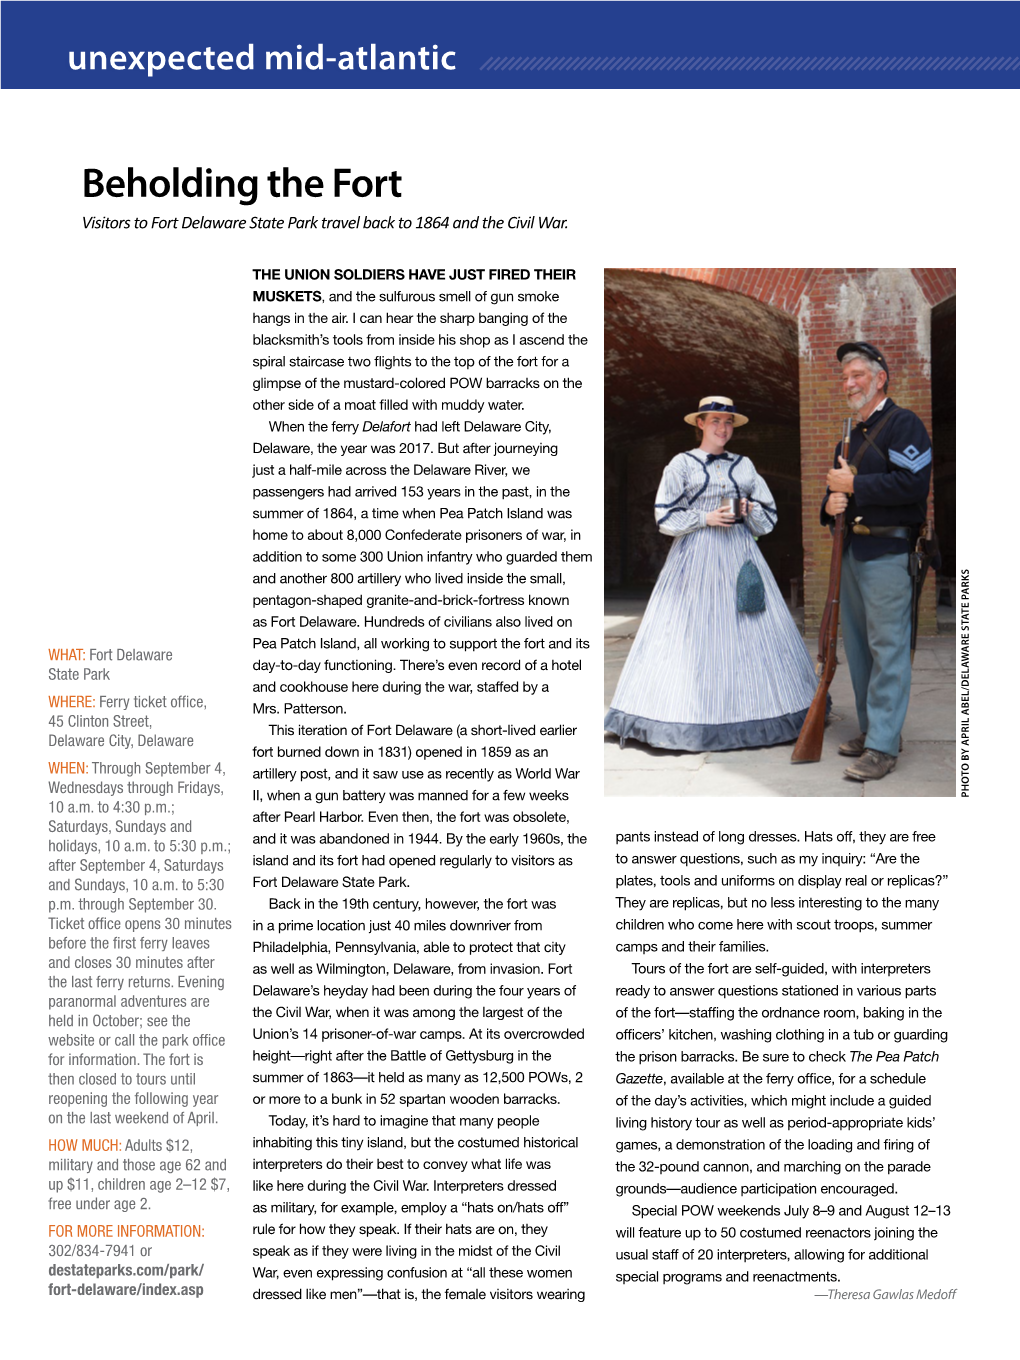 Beholding the Fort Visitors to Fort Delaware State Park Travel Back to 1864 and the Civil War